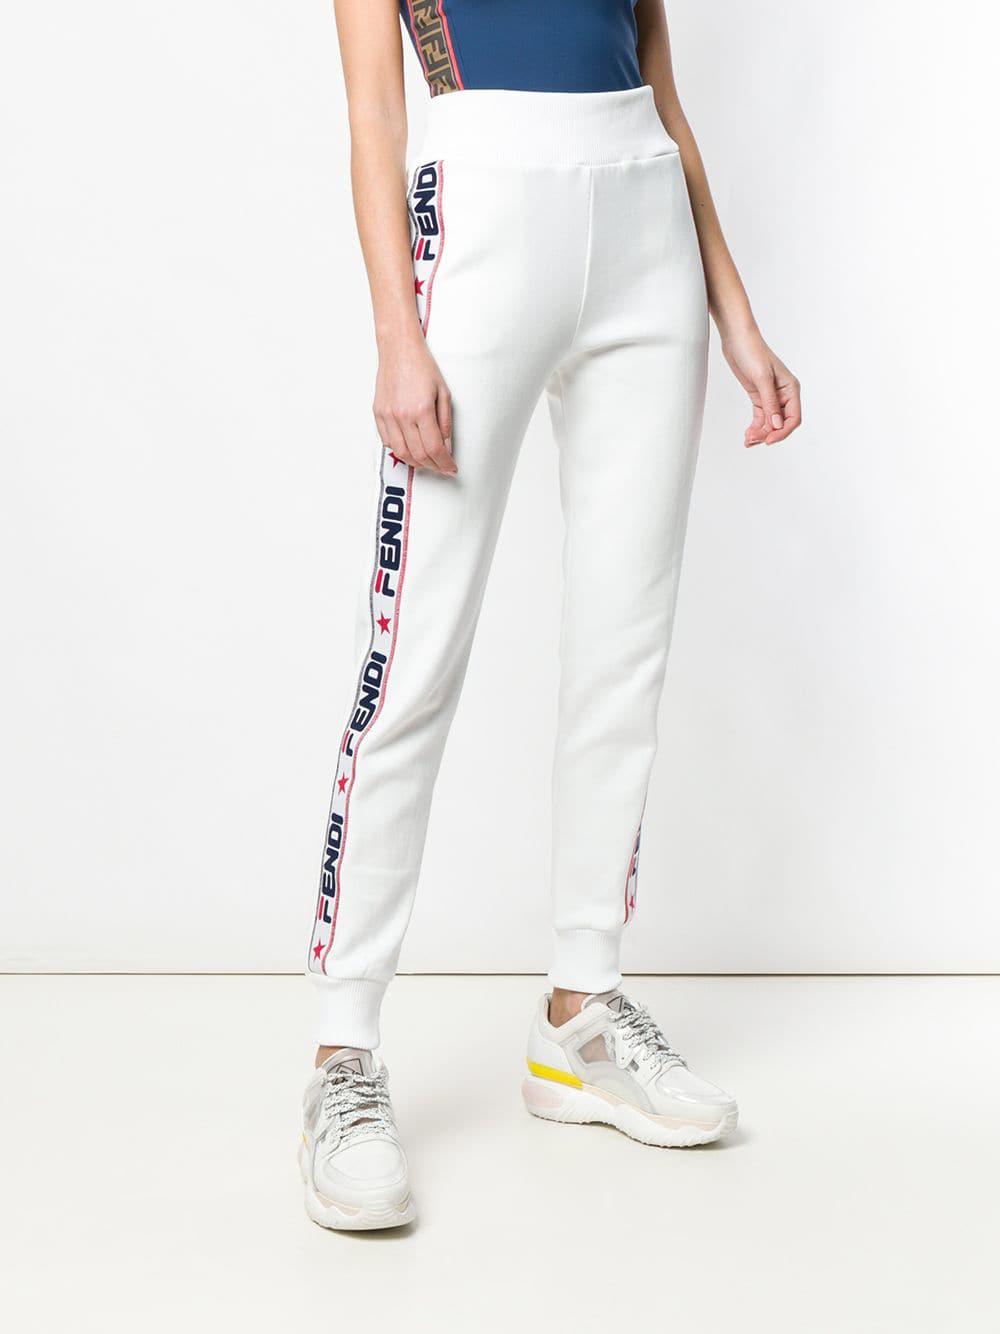 Fendi Side Band Track Pants in White | Lyst